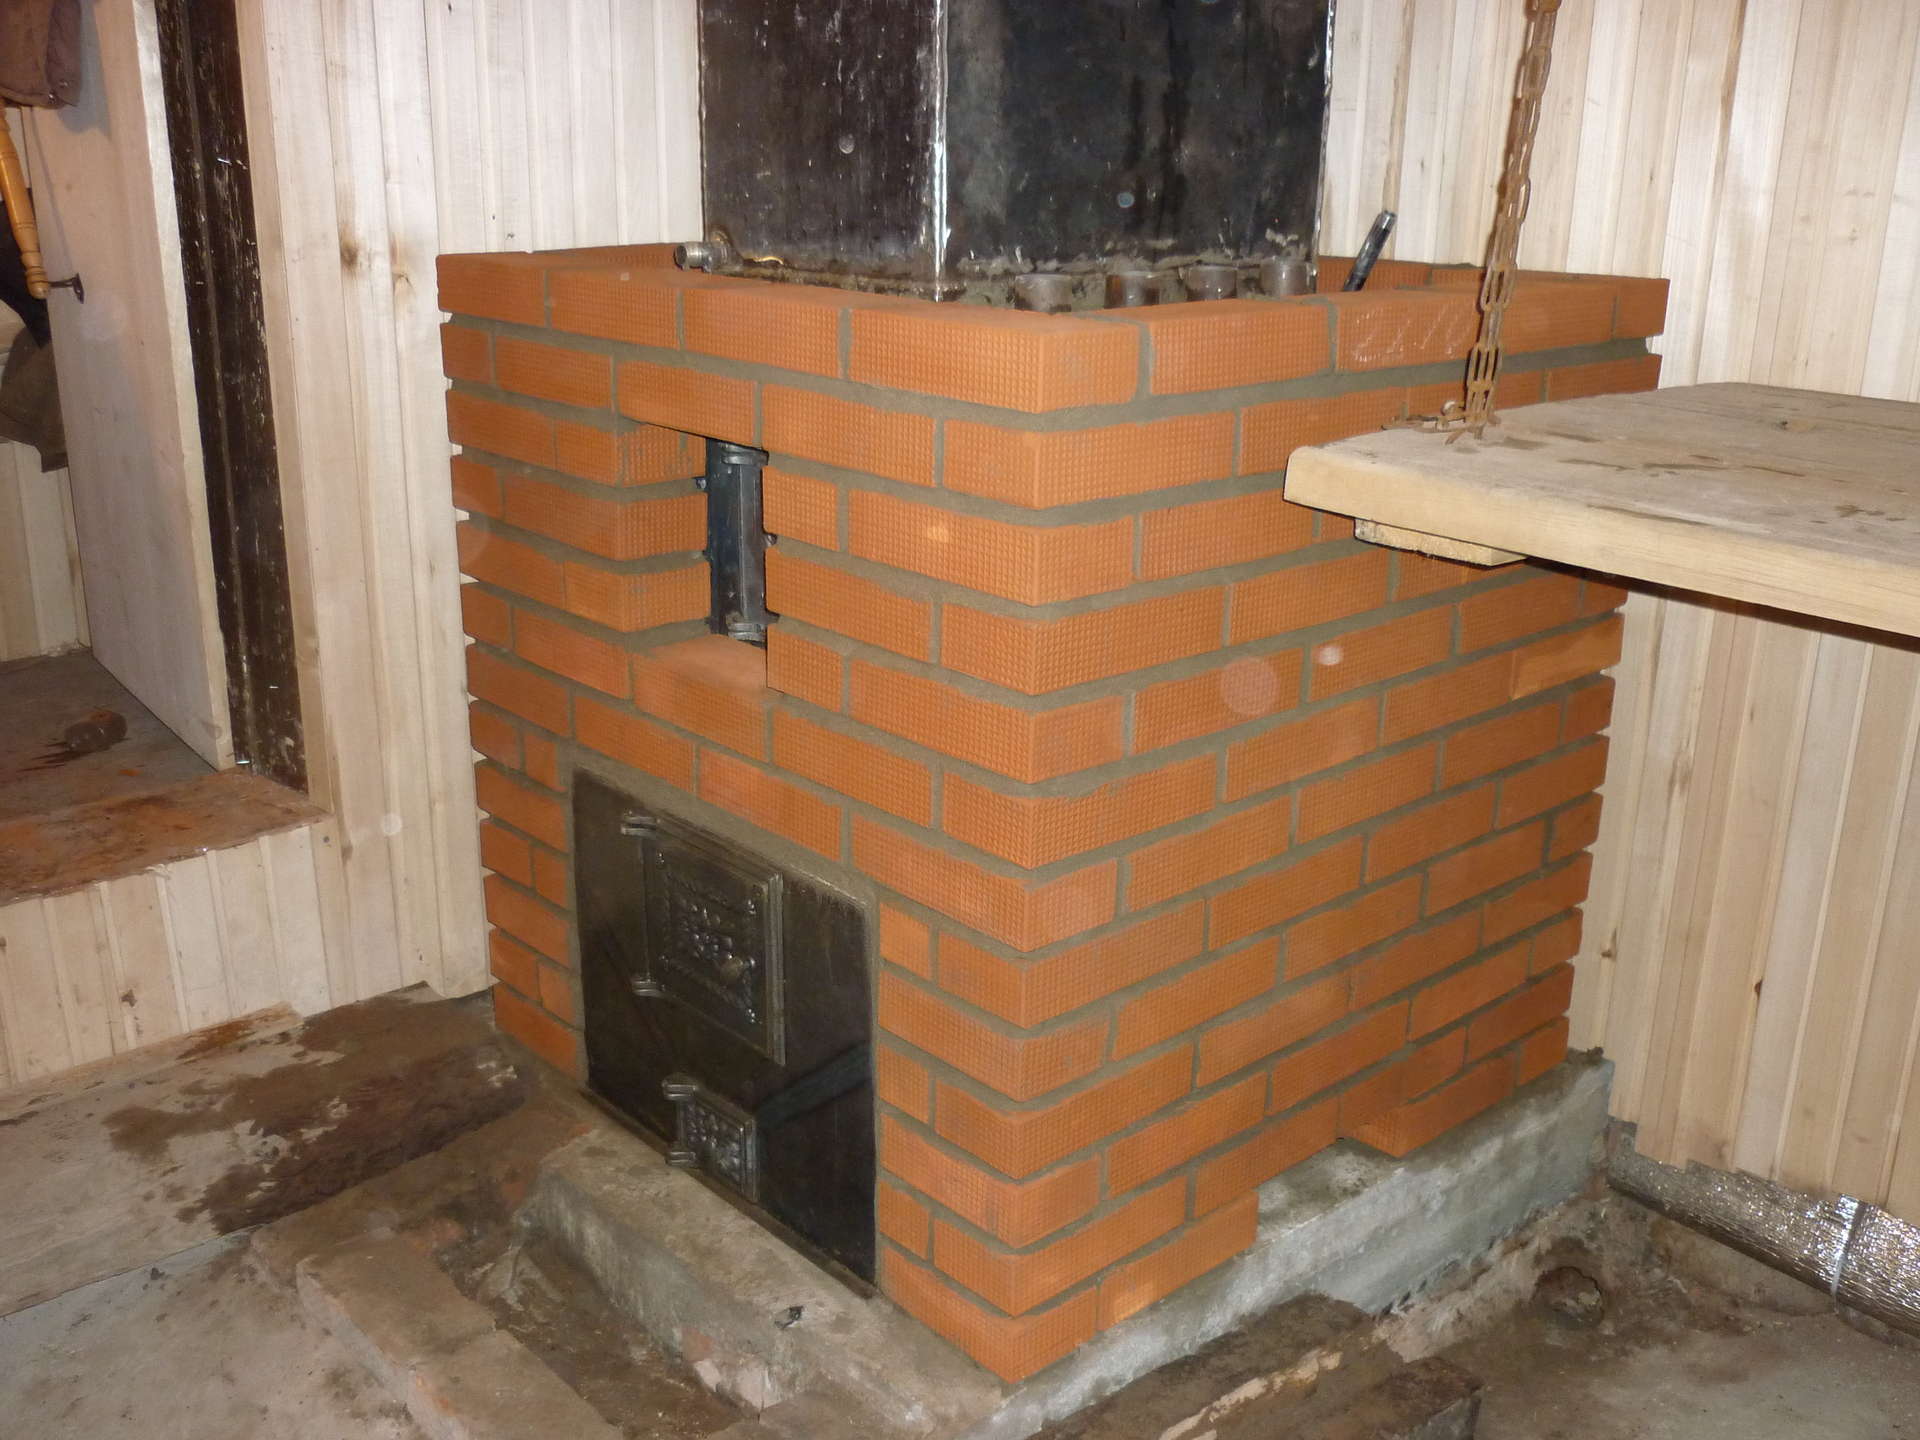 A stove for a garage on the wood: a wood burning stove with a long .